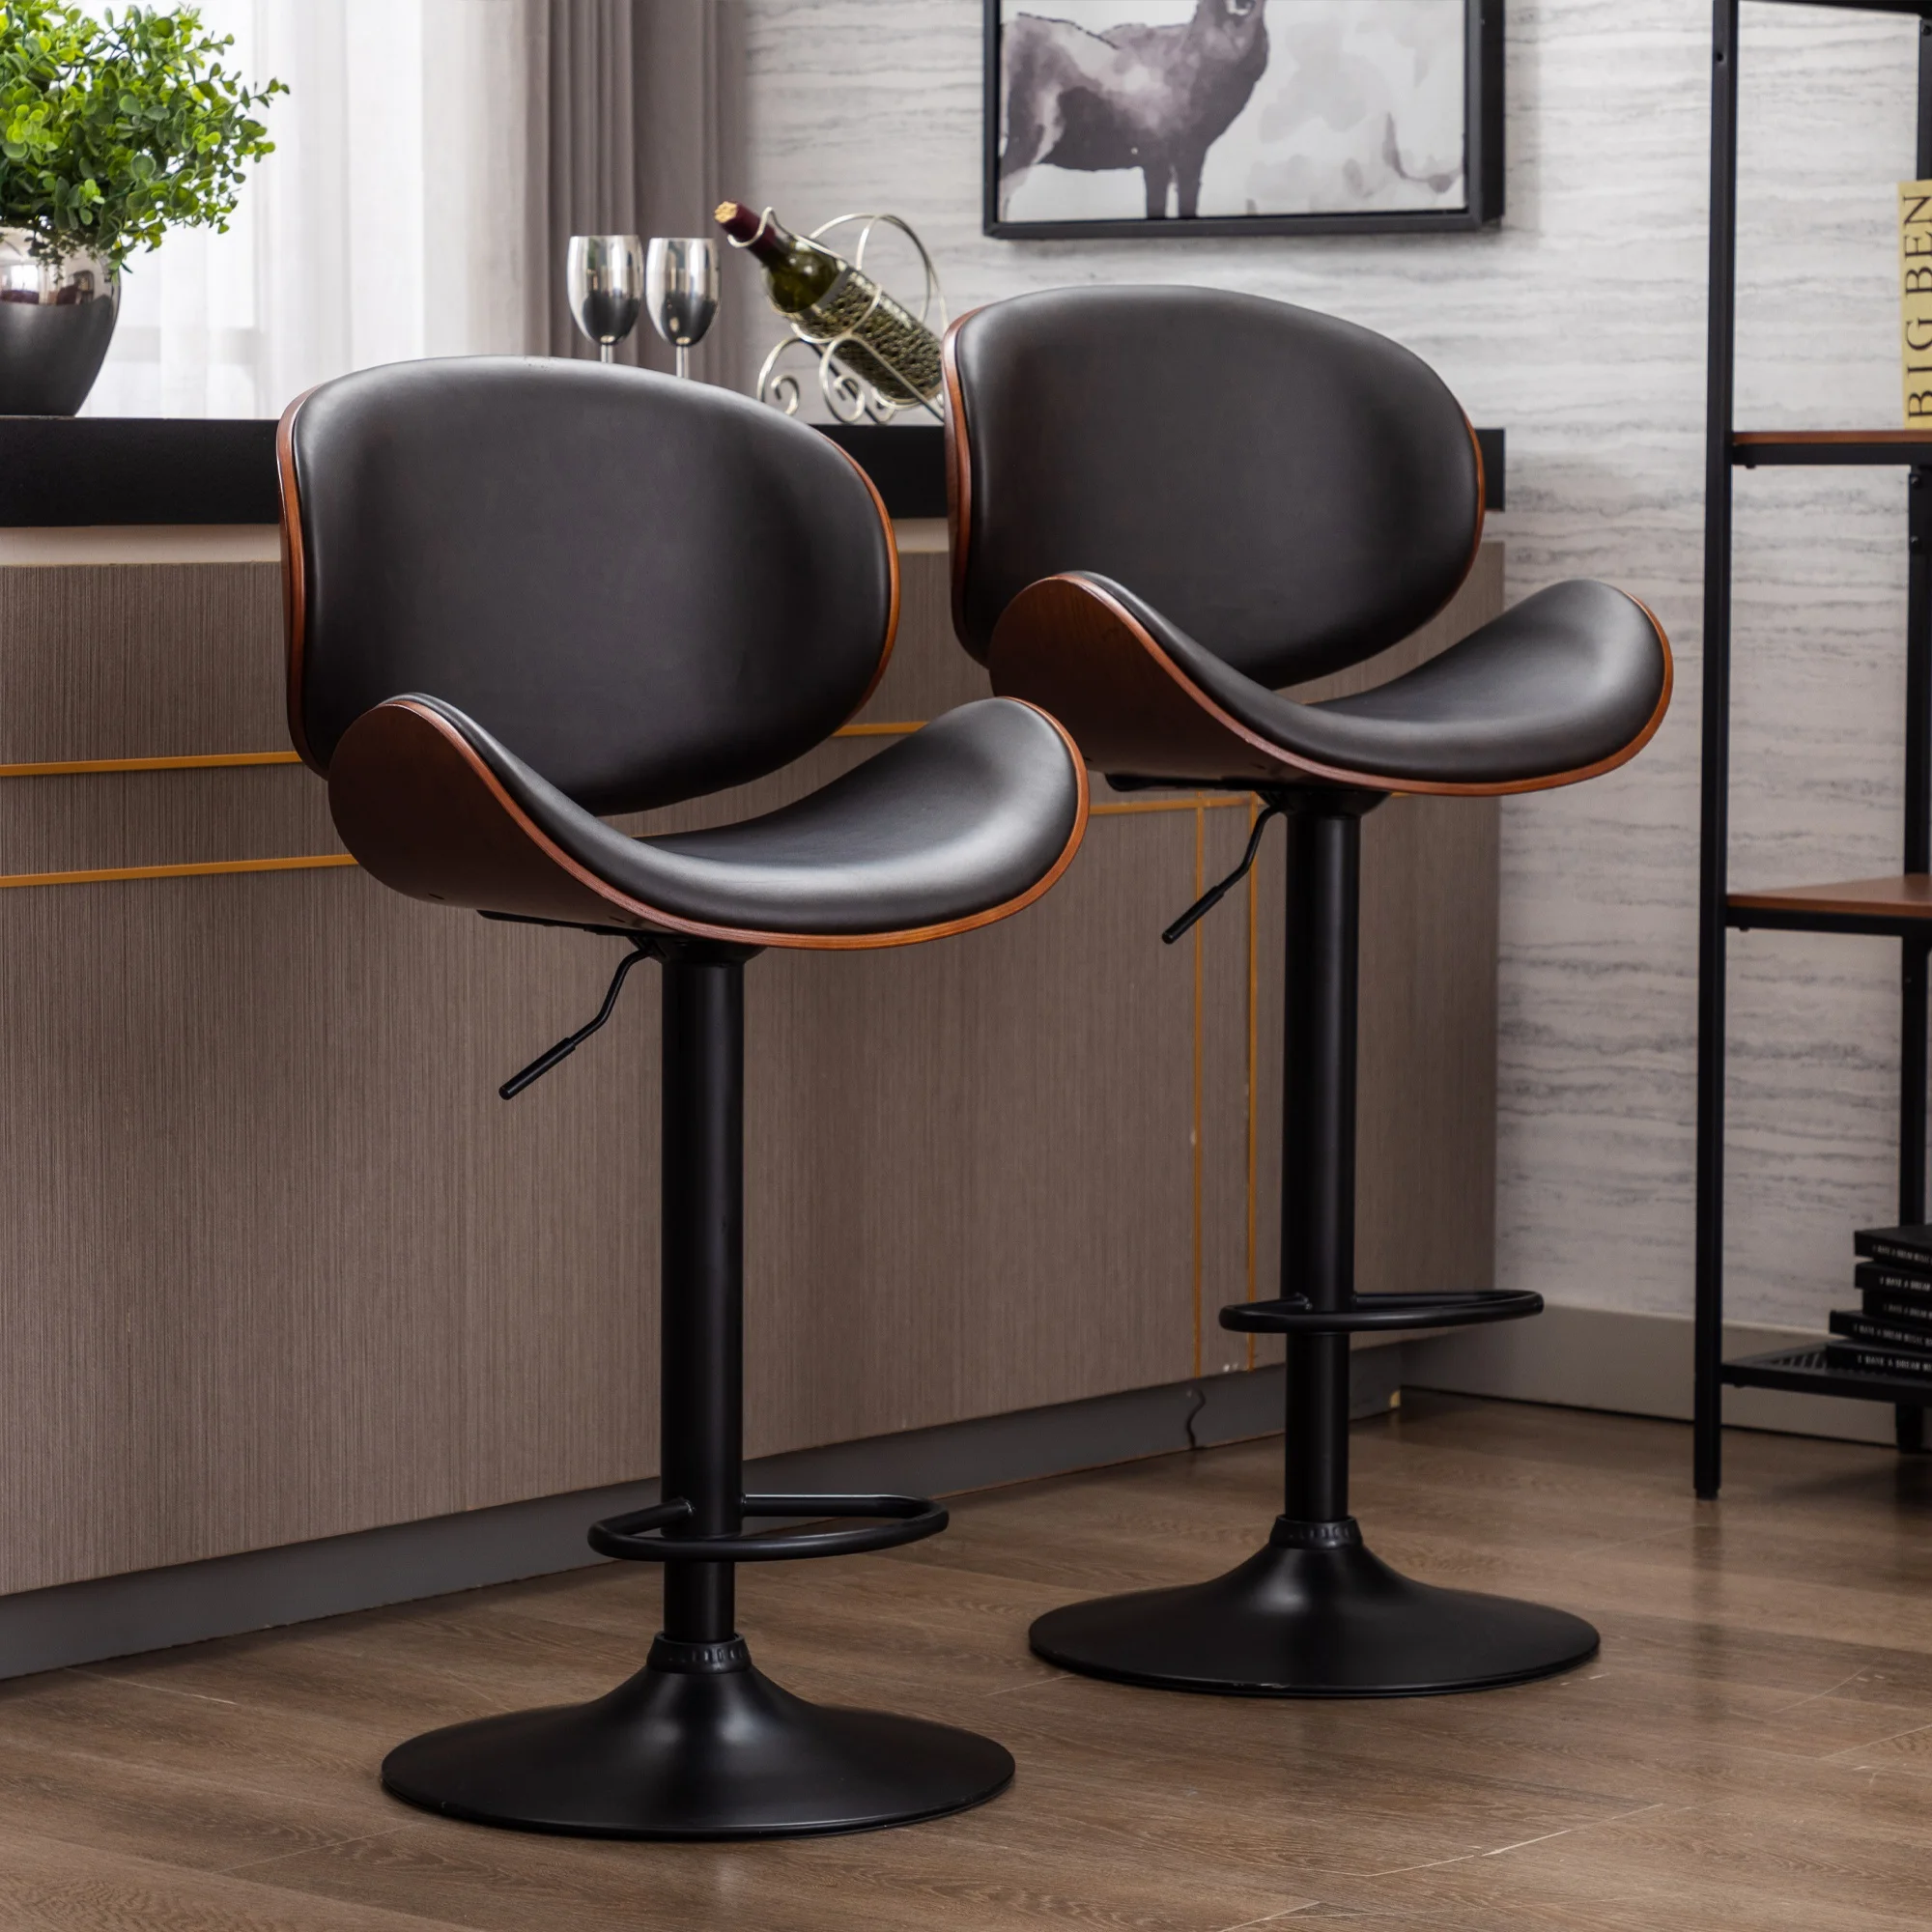 2pcs Bentwood Adjustable  Bar Stools Upholstered Swivel Barstool Dining Bar Chairs Mix Color Pu Leather Barstools Furniture